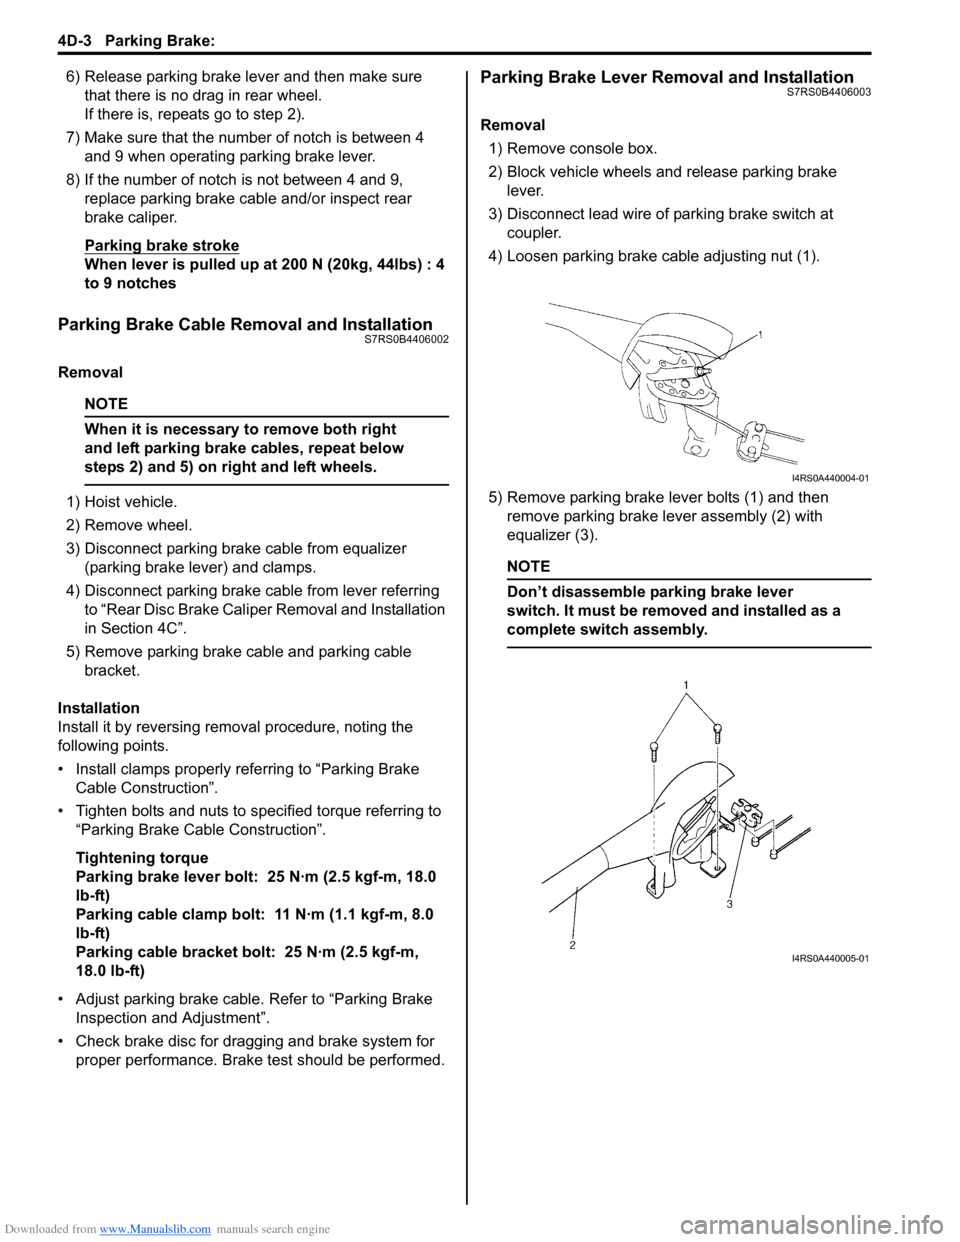 SUZUKI SWIFT 2007 2.G Service Workshop Manual Downloaded from www.Manualslib.com manuals search engine 4D-3 Parking Brake: 
6) Release parking brake lever and then make sure that there is no drag in rear wheel.
If there is, repeats go to step 2).